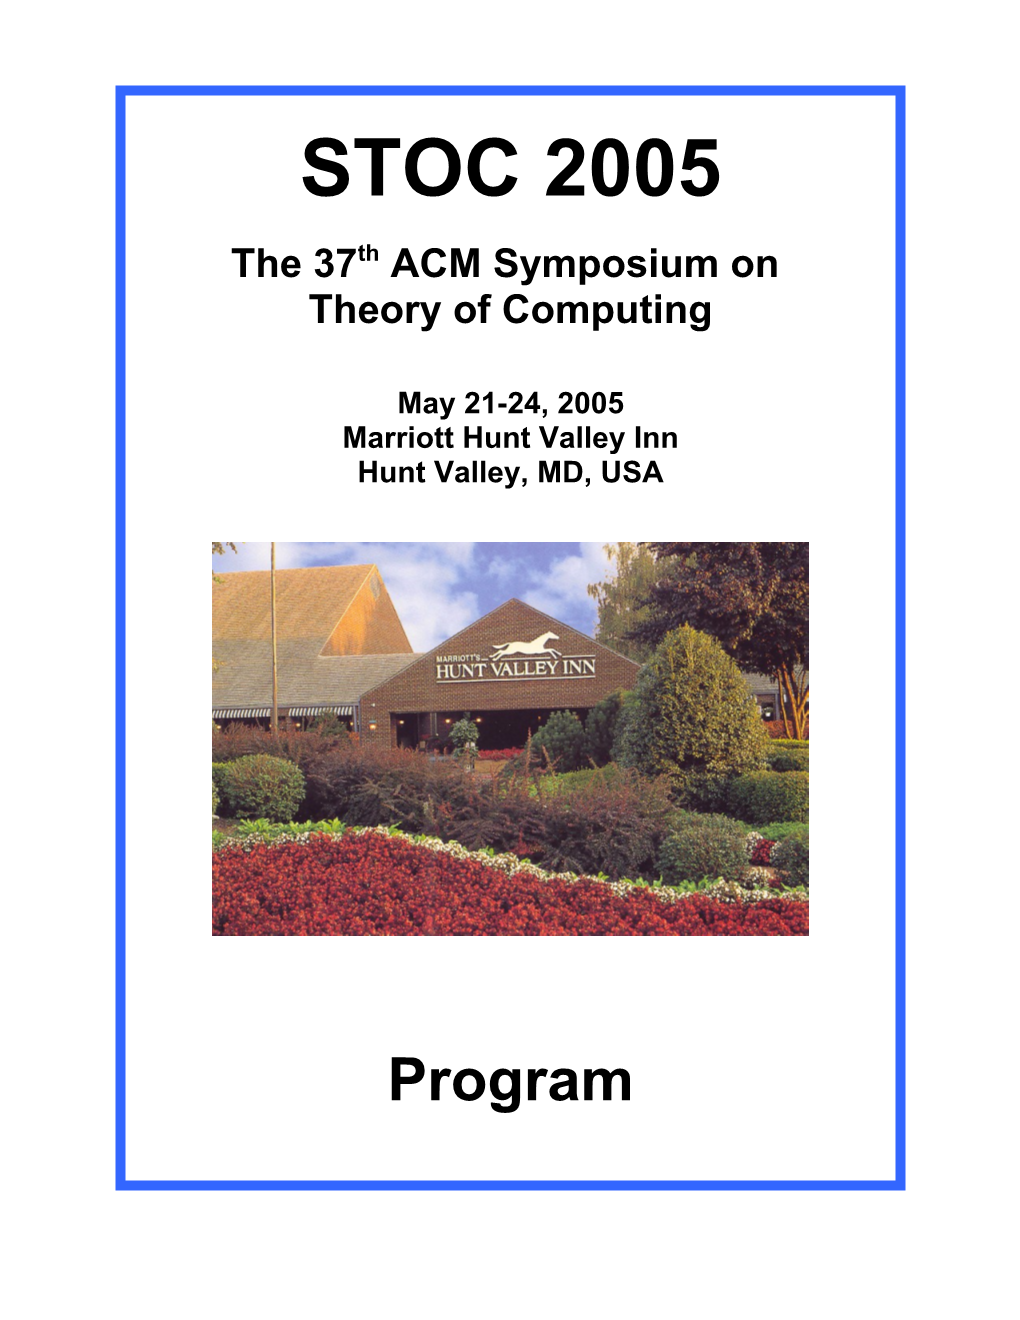 The 37Th ACM Symposium on Theory of Computing